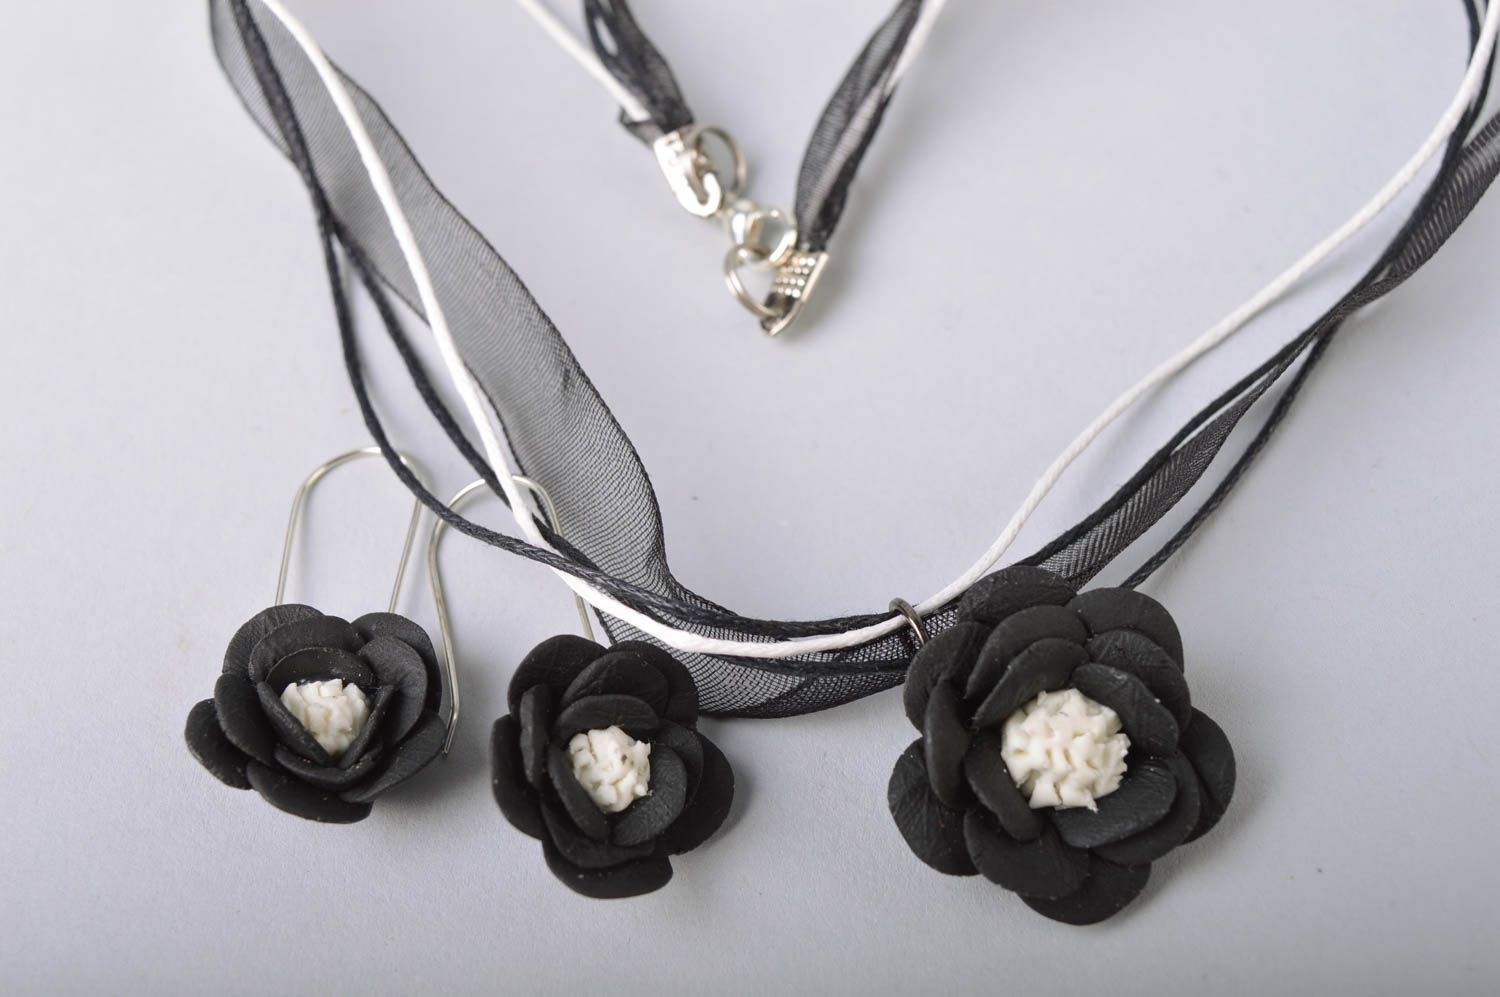 Handmade cold porcelain jewelry set earrings and necklace with black flowers photo 3